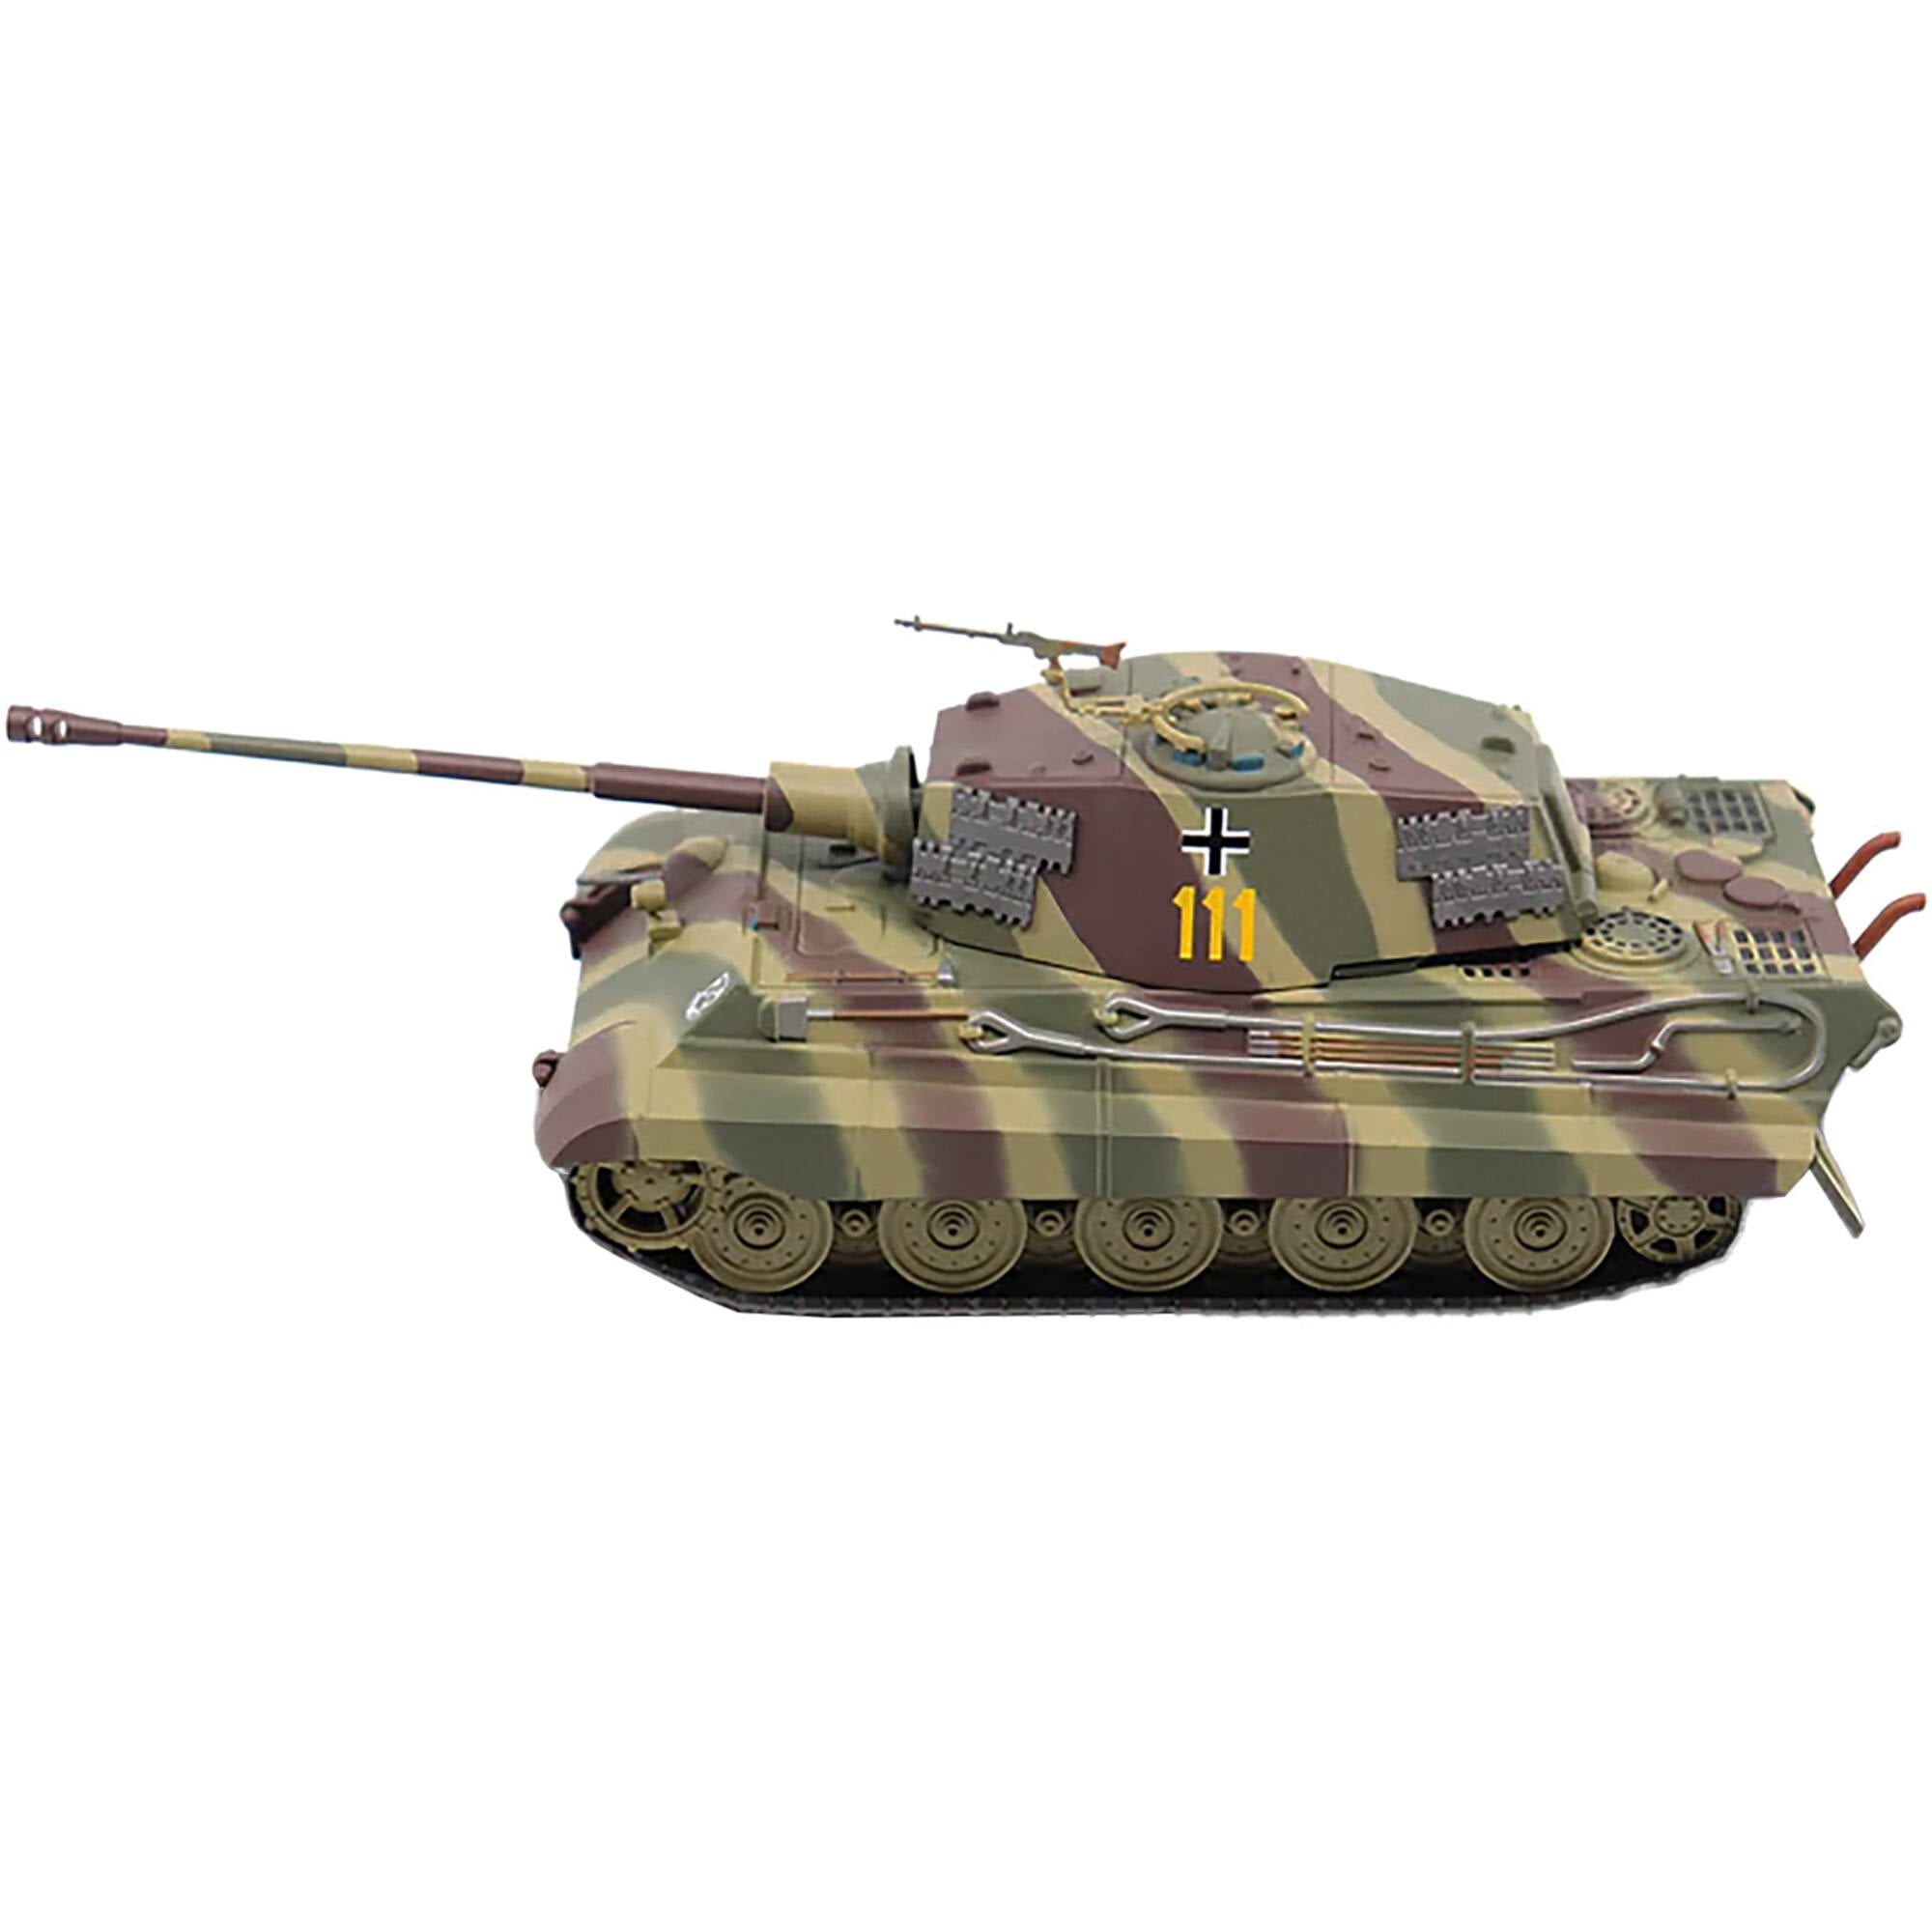 Picture of AFVs of WWII 23187-44 German SD. PzKpfw VI King Tiger Ausf. B Heavy Tank No.111 Schwere SS Panzer Abteilung 101 Belgium 1944 1 by 43 Scale Diecast Model Car